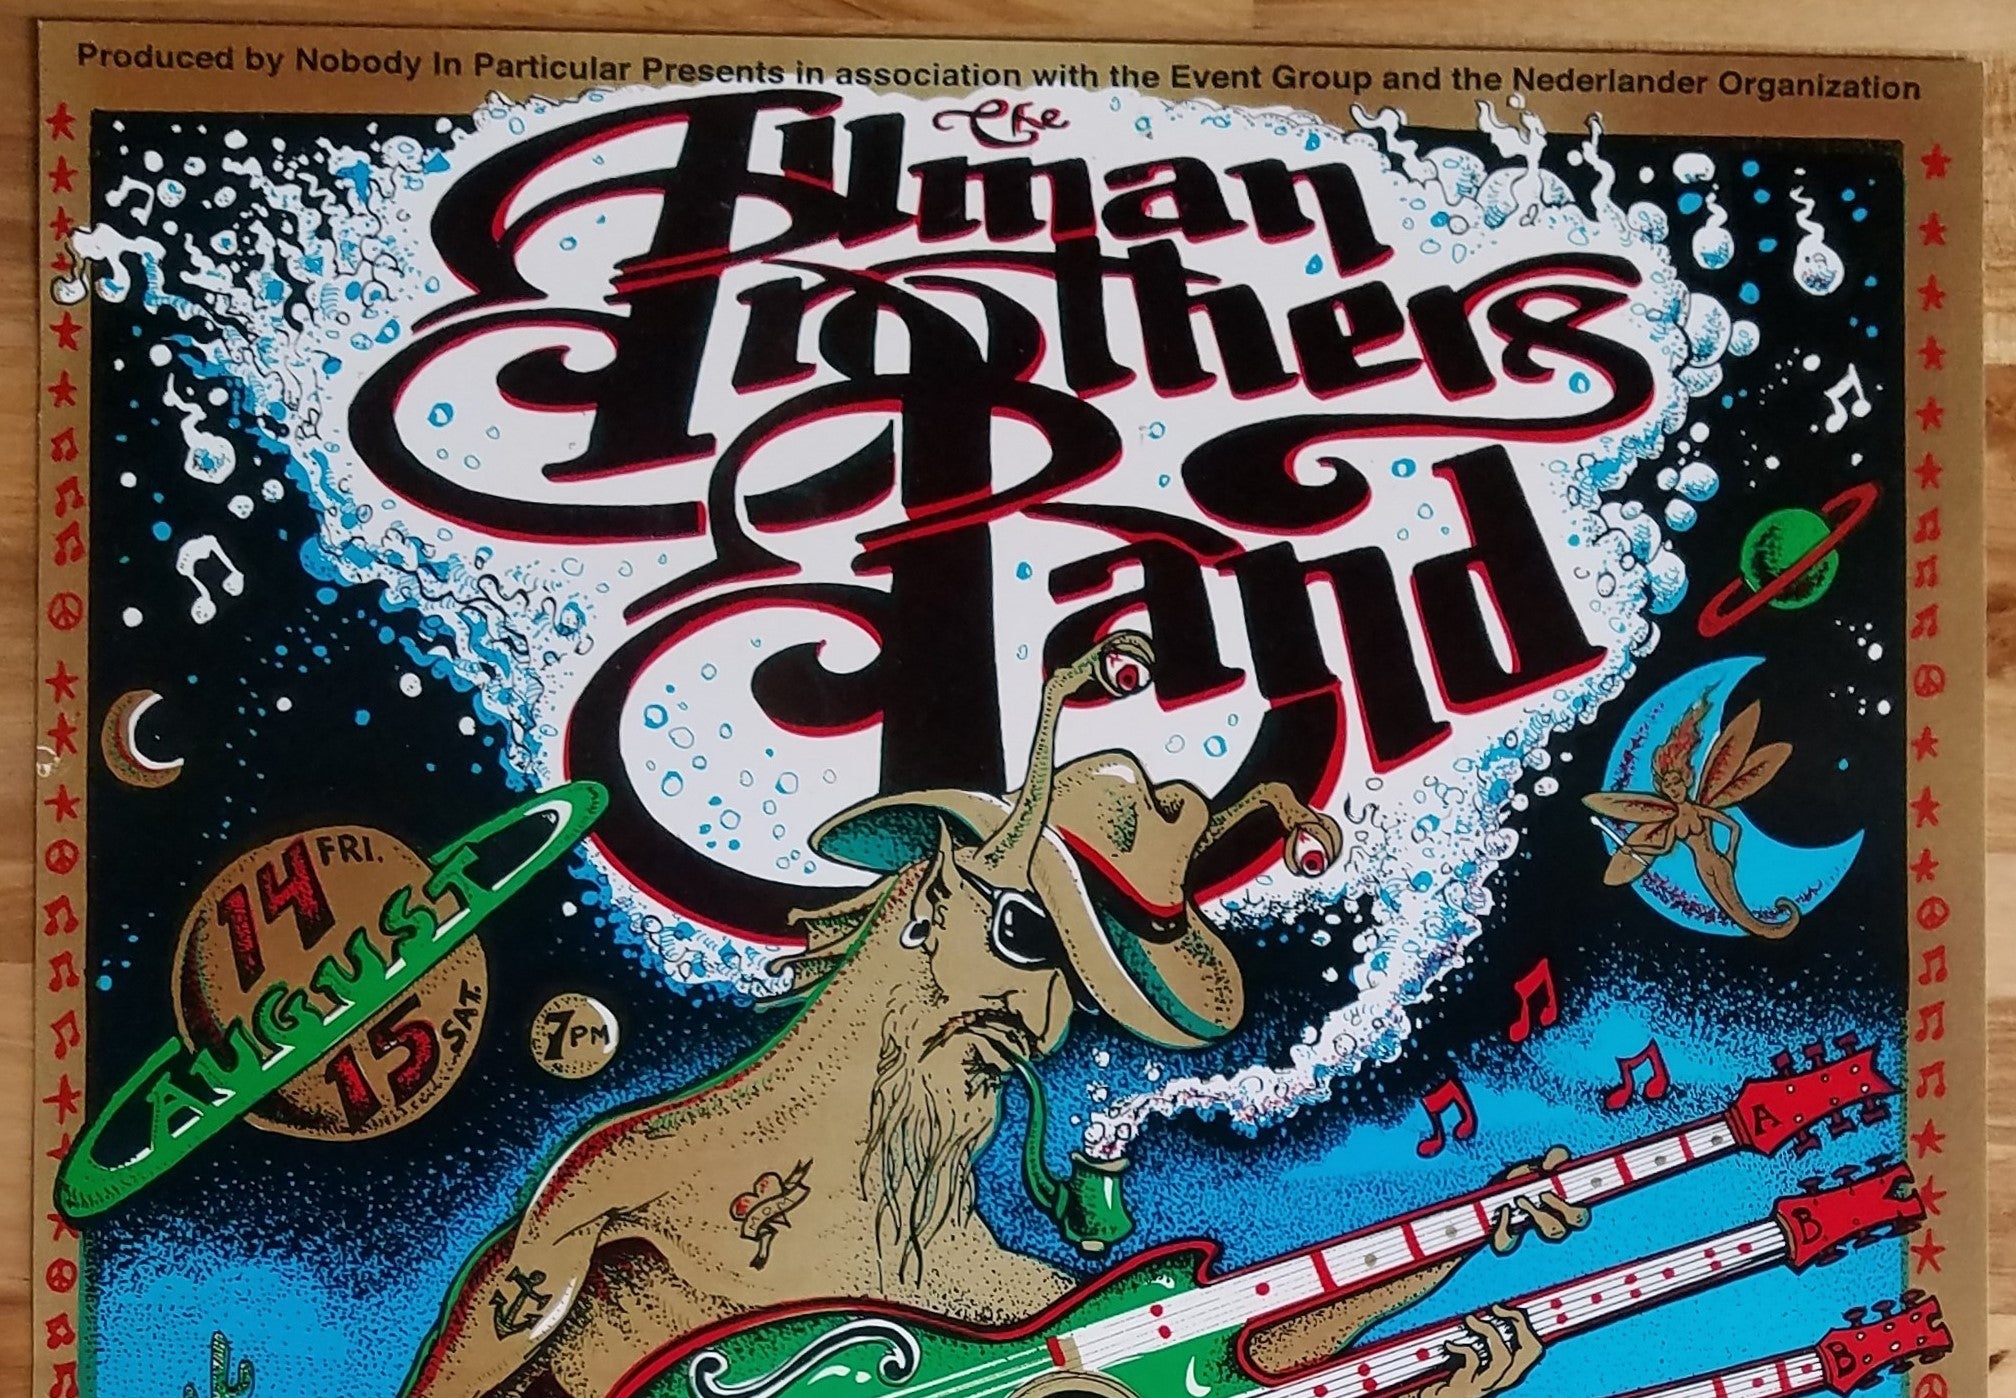 "Allman Brothers Screenprint Poster Red Rocks 1998" by Emek.  8/14/98 and 8/15/98.  Print is IN HOUSE and READY TO SHIP!